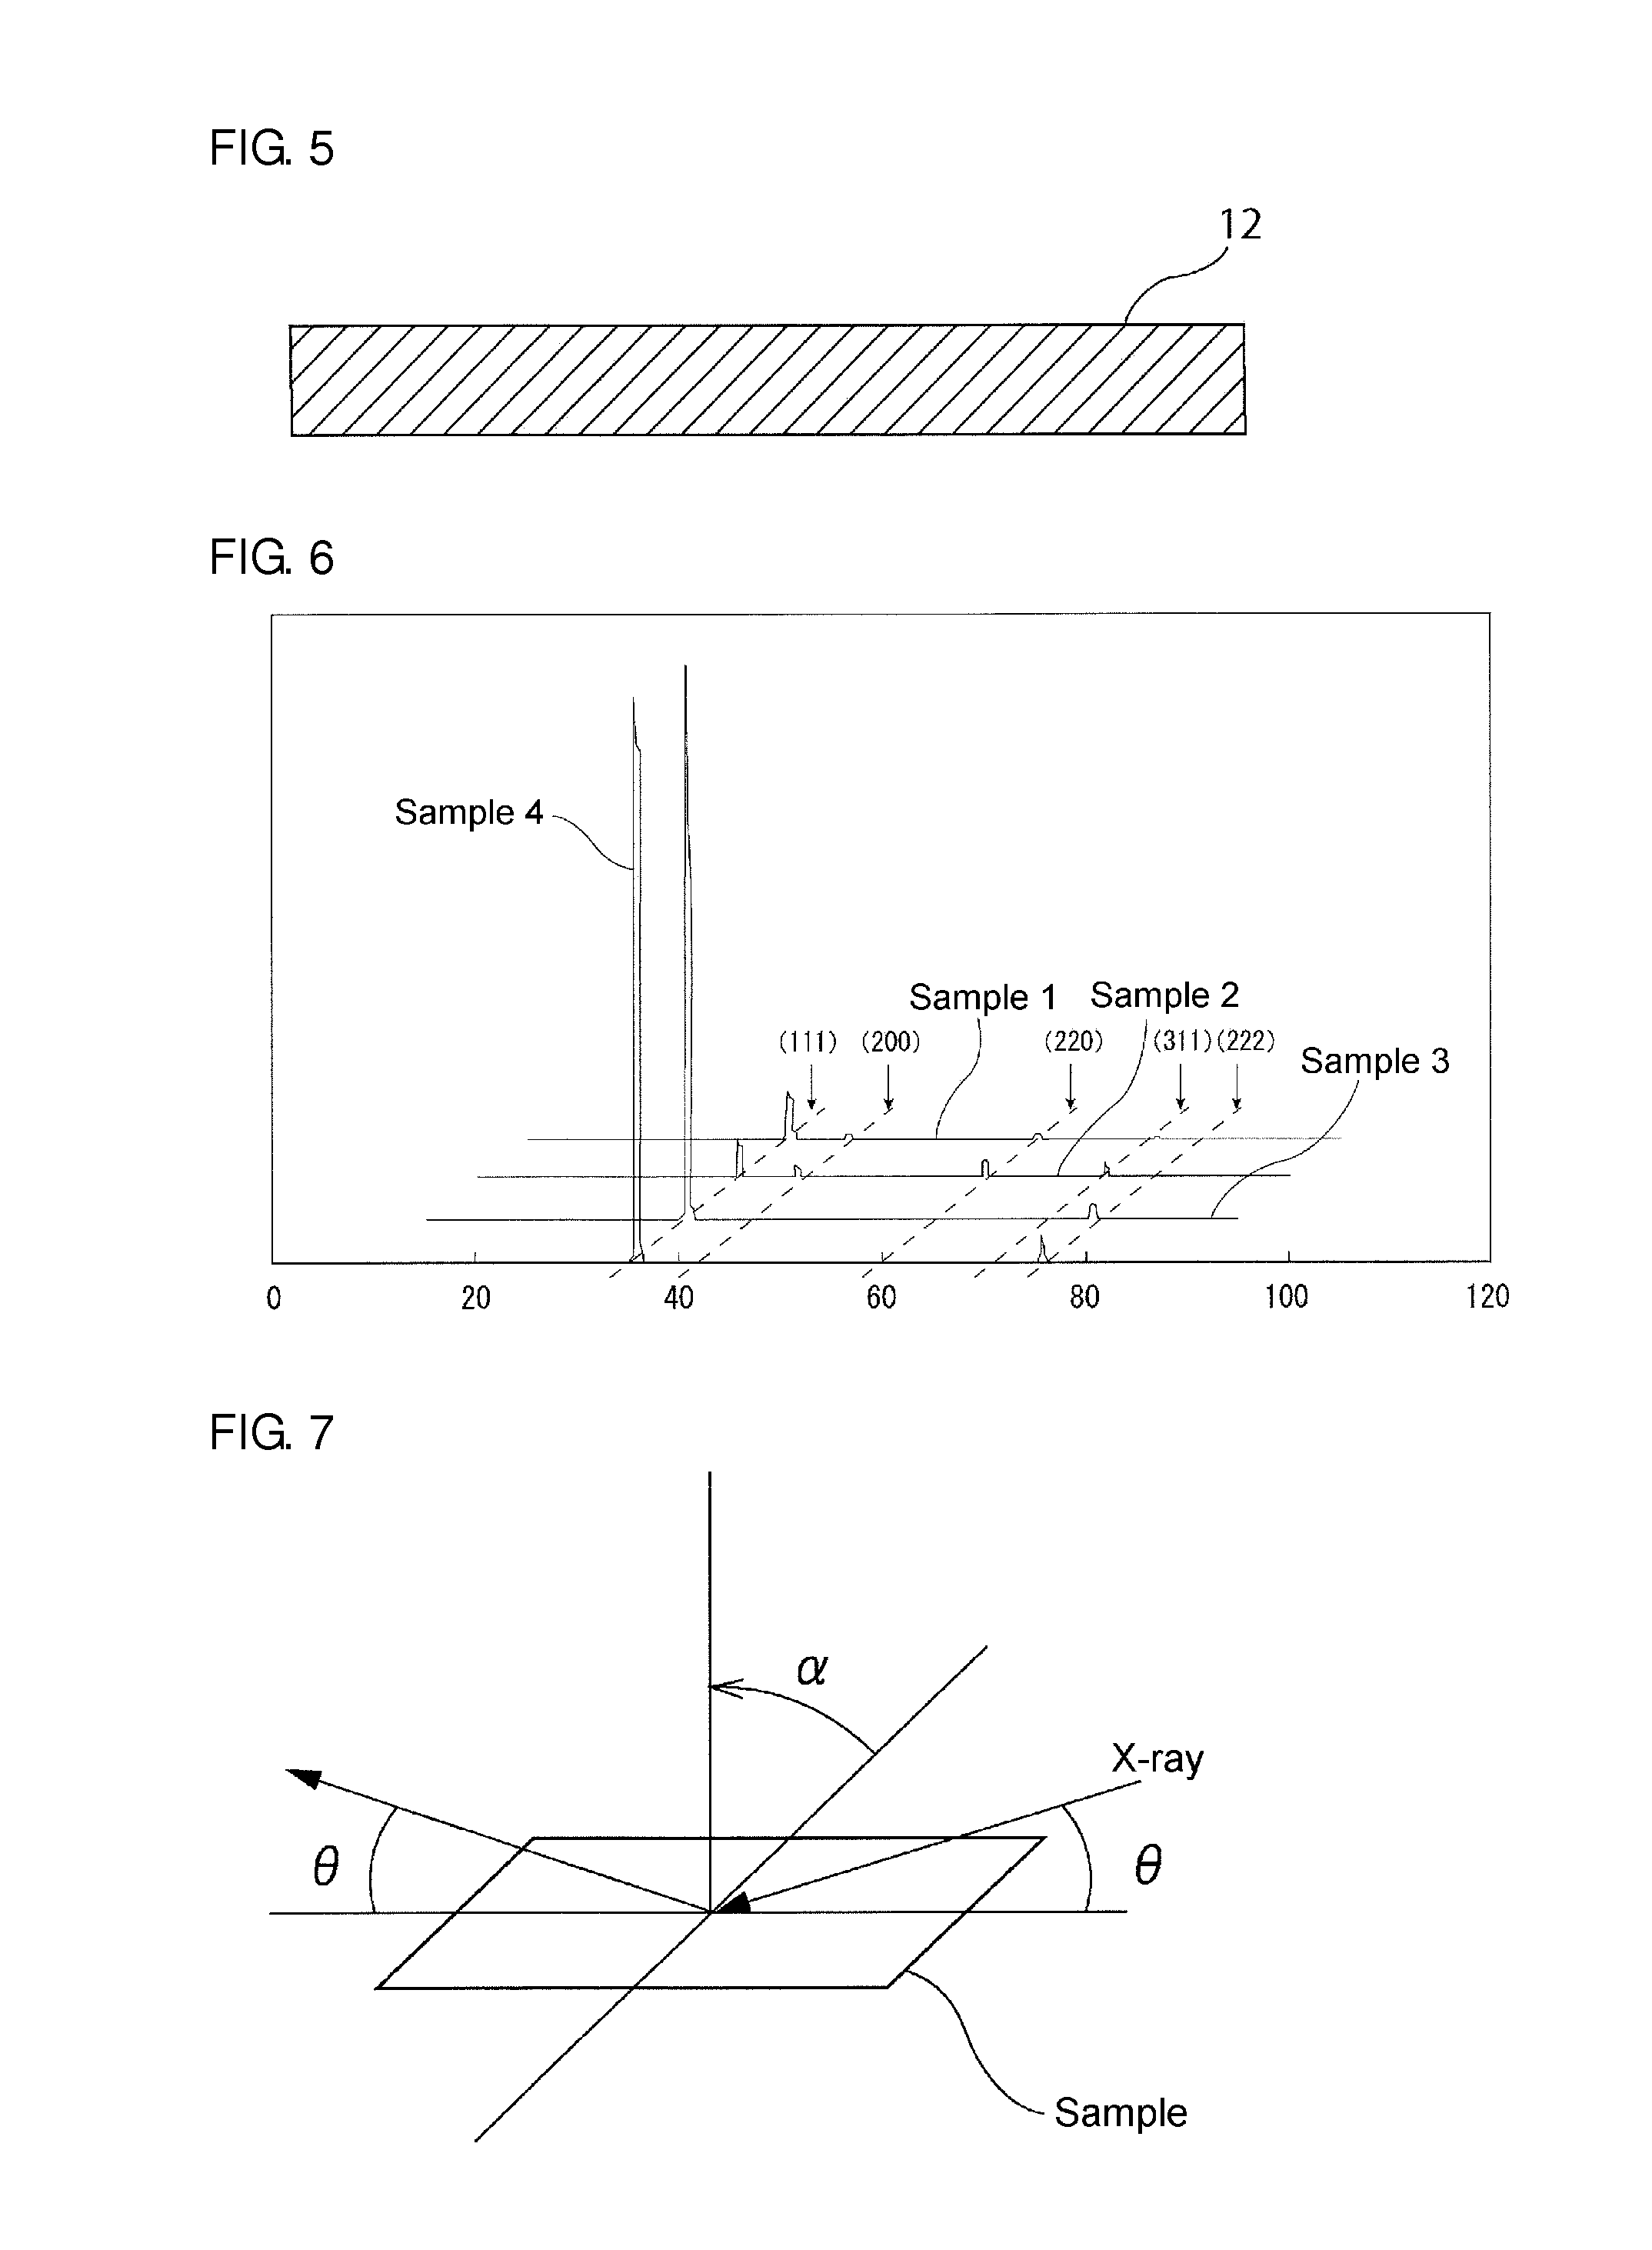 Unit for liquid phase epitaxial growth of monocrystalline silicon carbide, and method for liquid phase epitaxial growth of monocrystalline silicon carbide